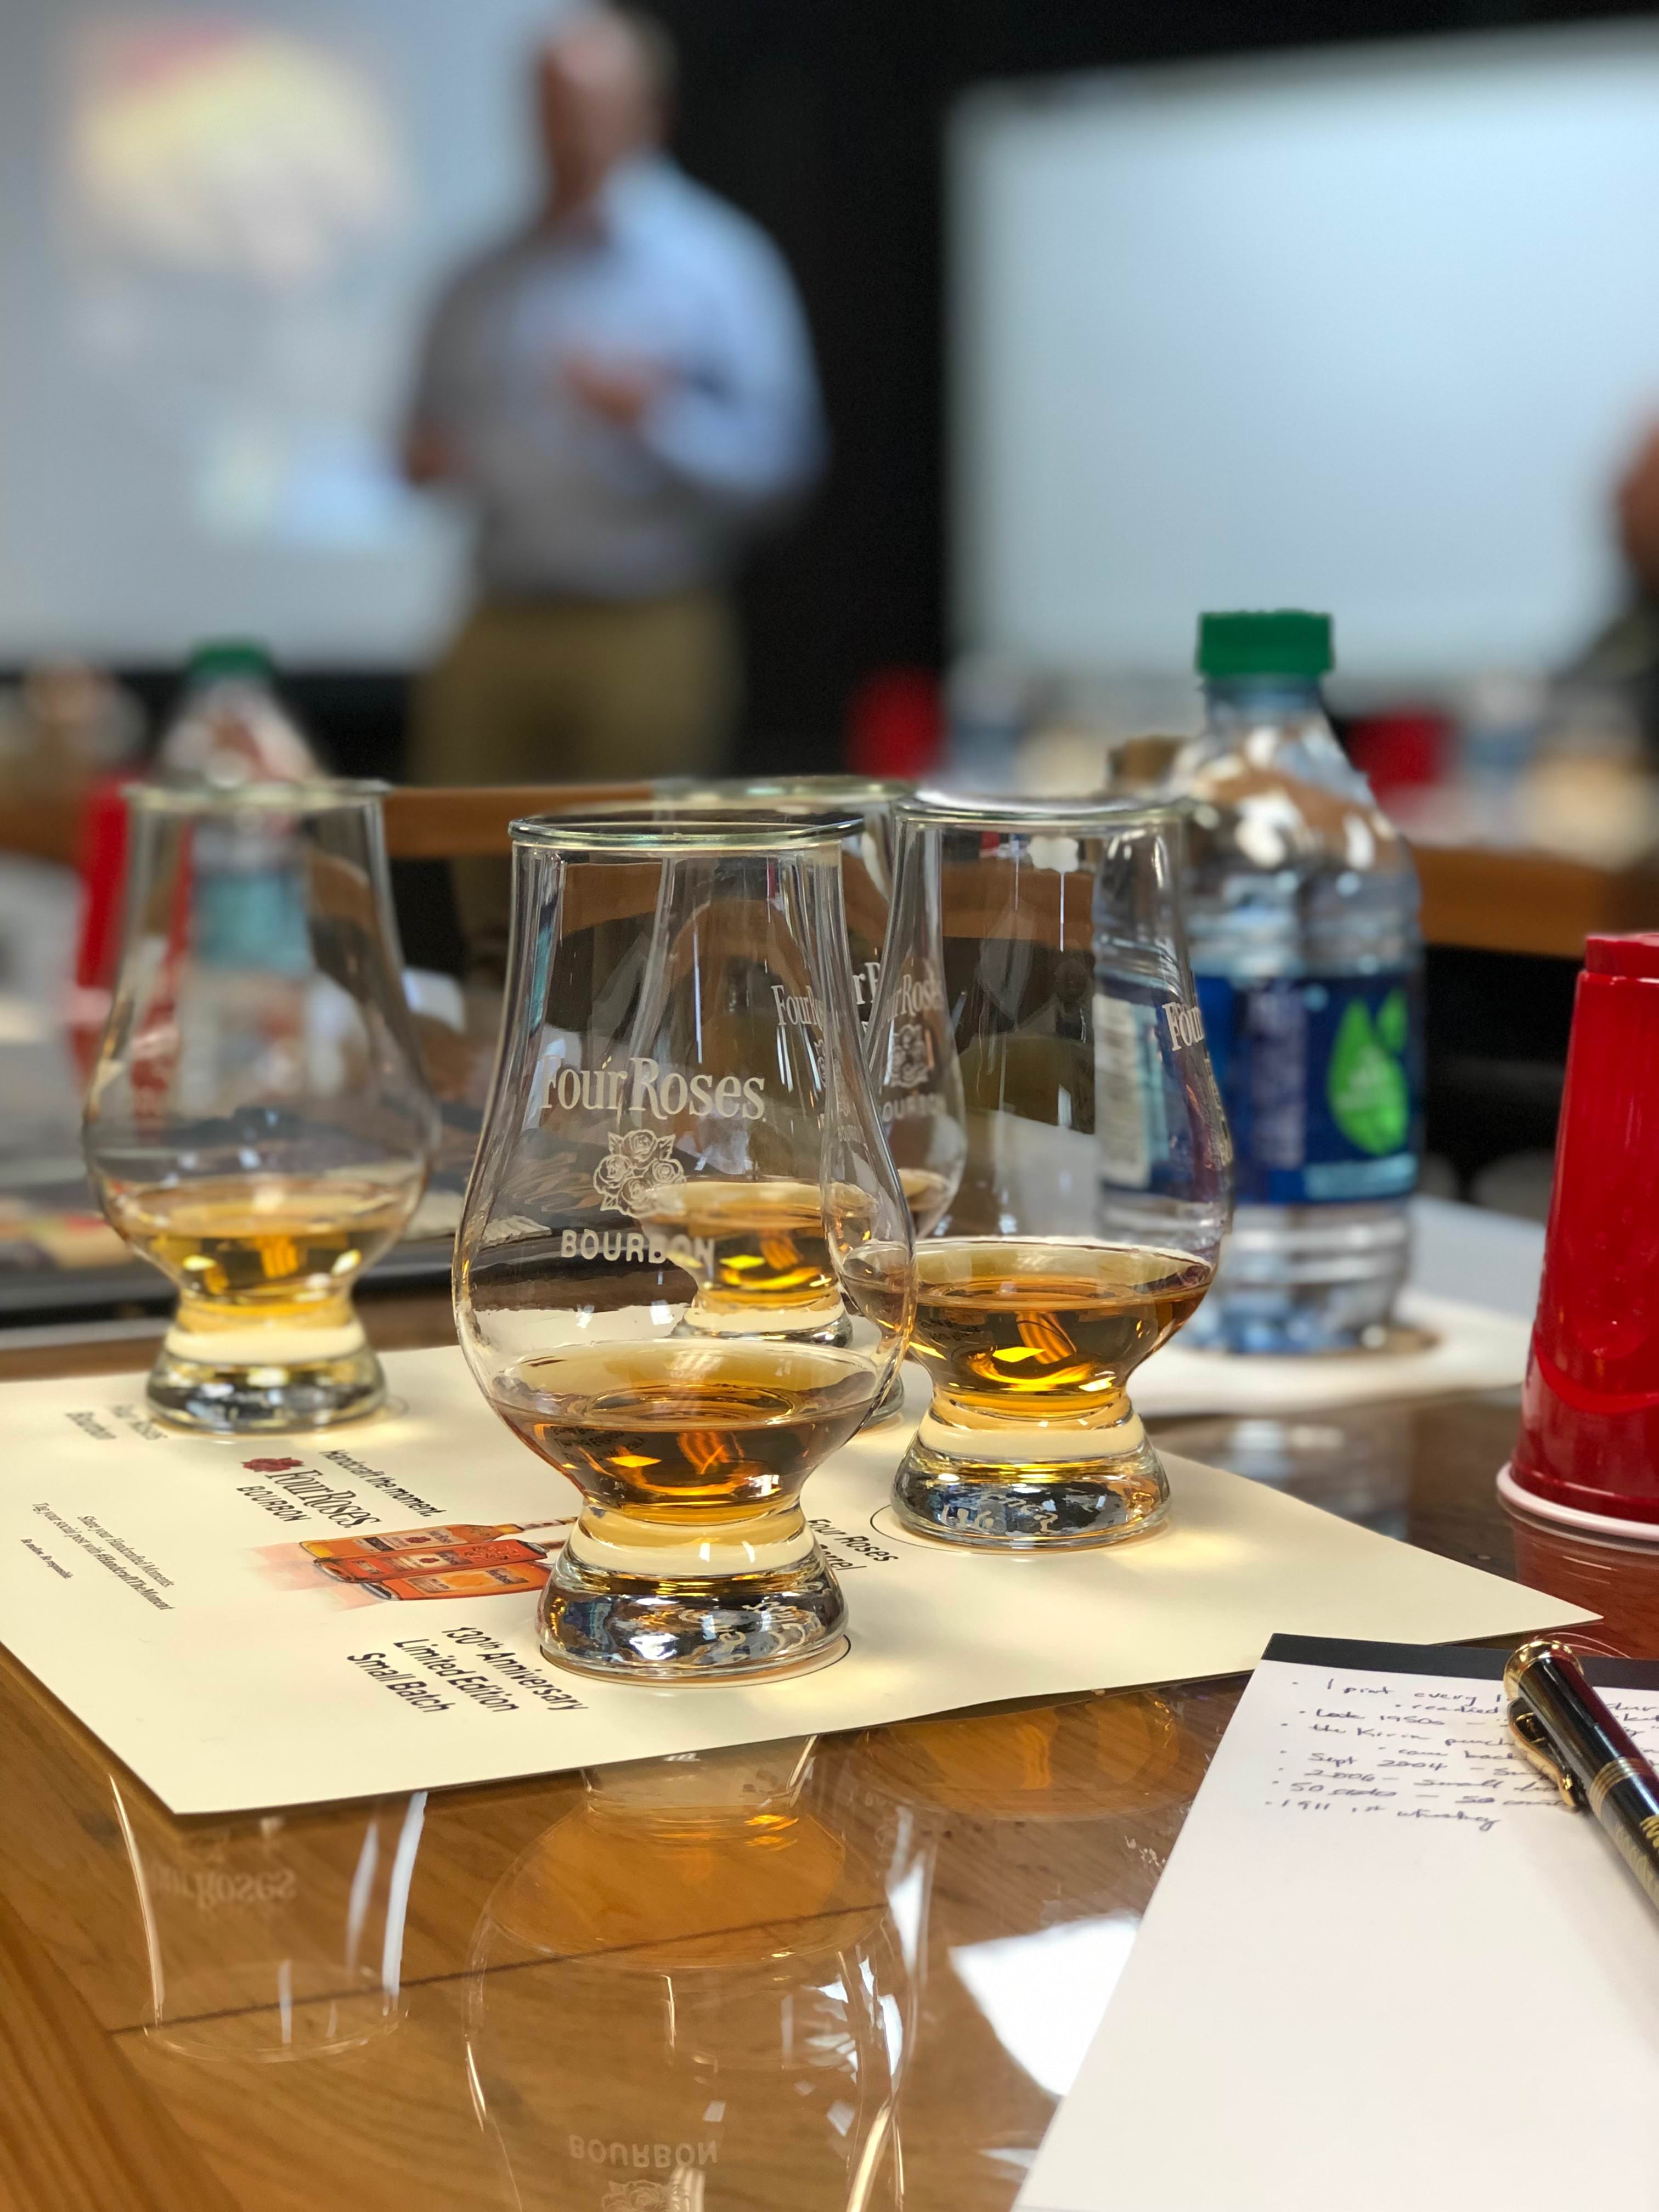 A delicious tour through the Four Roses product line.